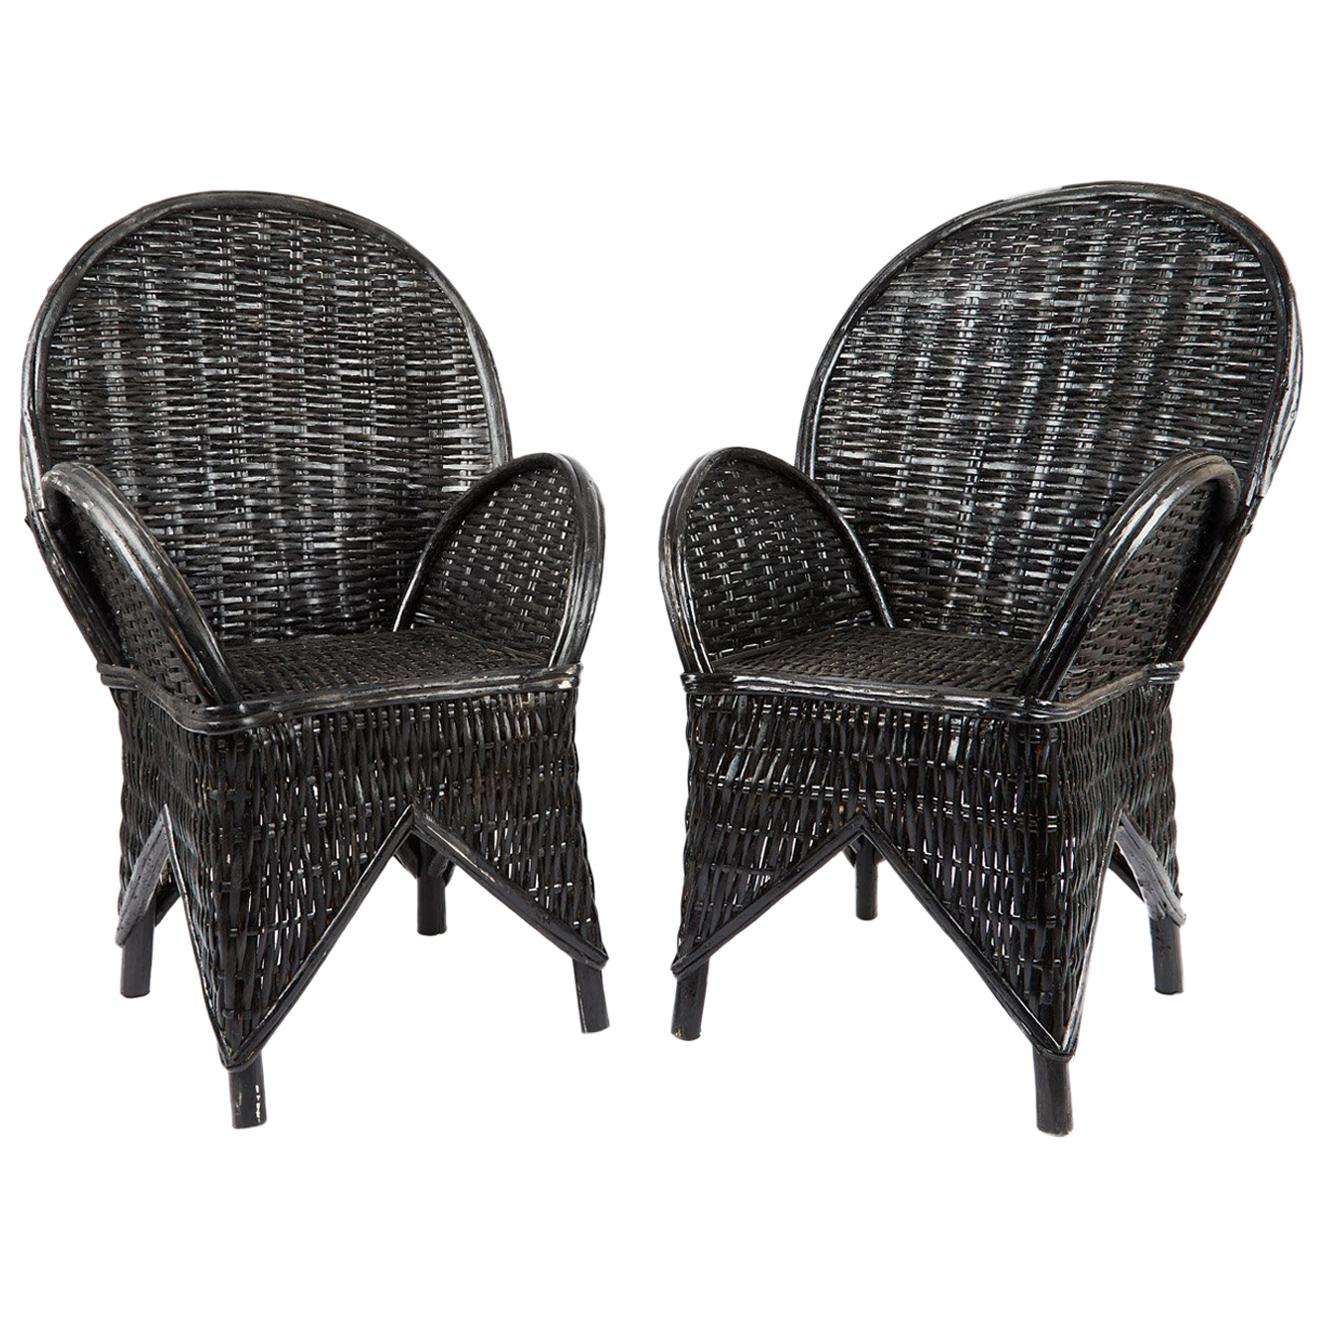 Pair of Moroccan Wicker Chairs